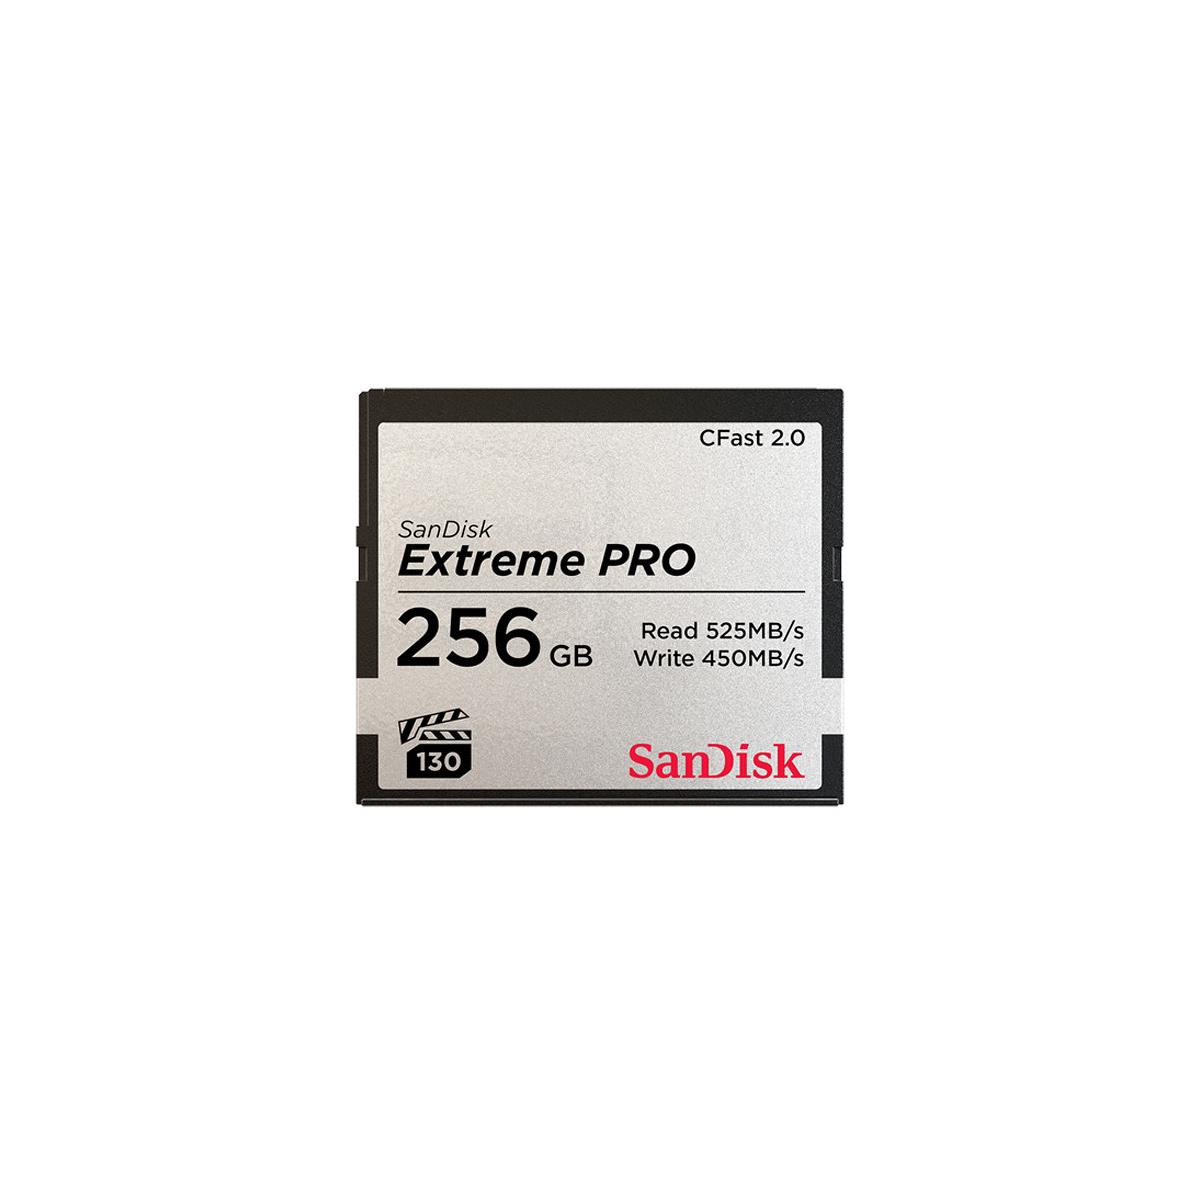 Image of SanDisk Extreme PRO 256GB CFast 2.0 Memory Card